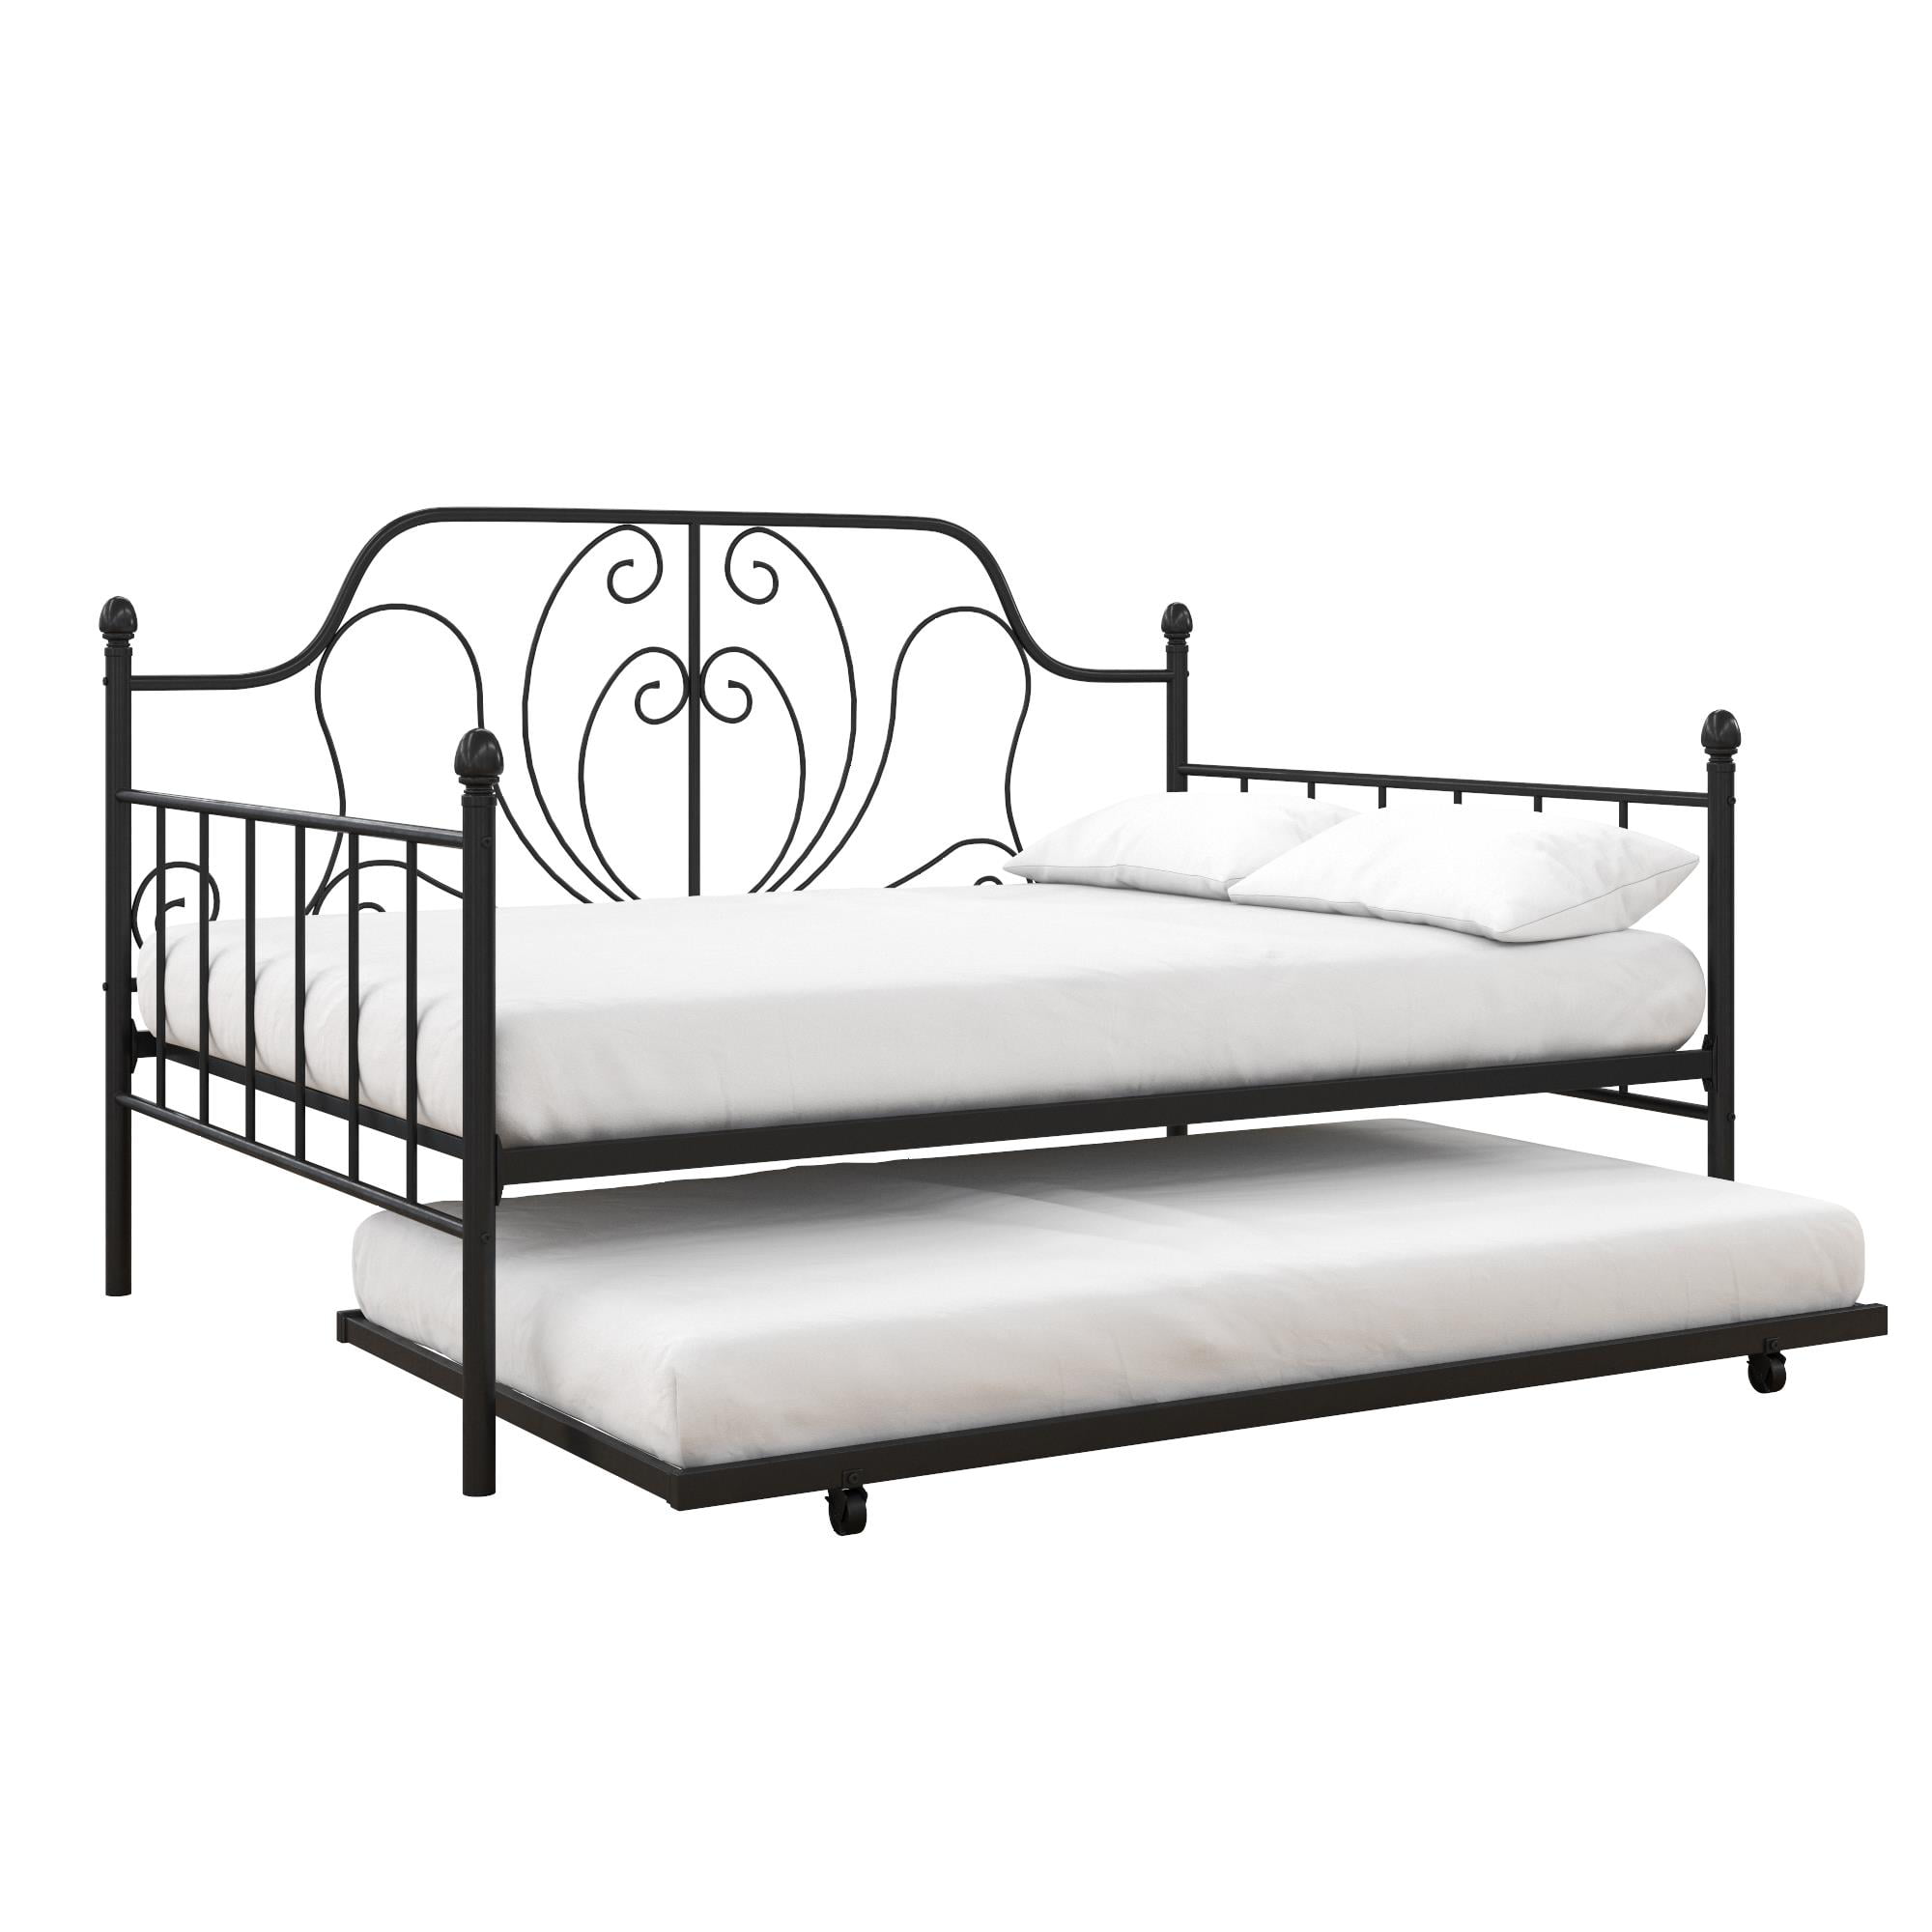 Dhp Ivorie Metal Daybed With Trundle Fulltwin Size Frame Black